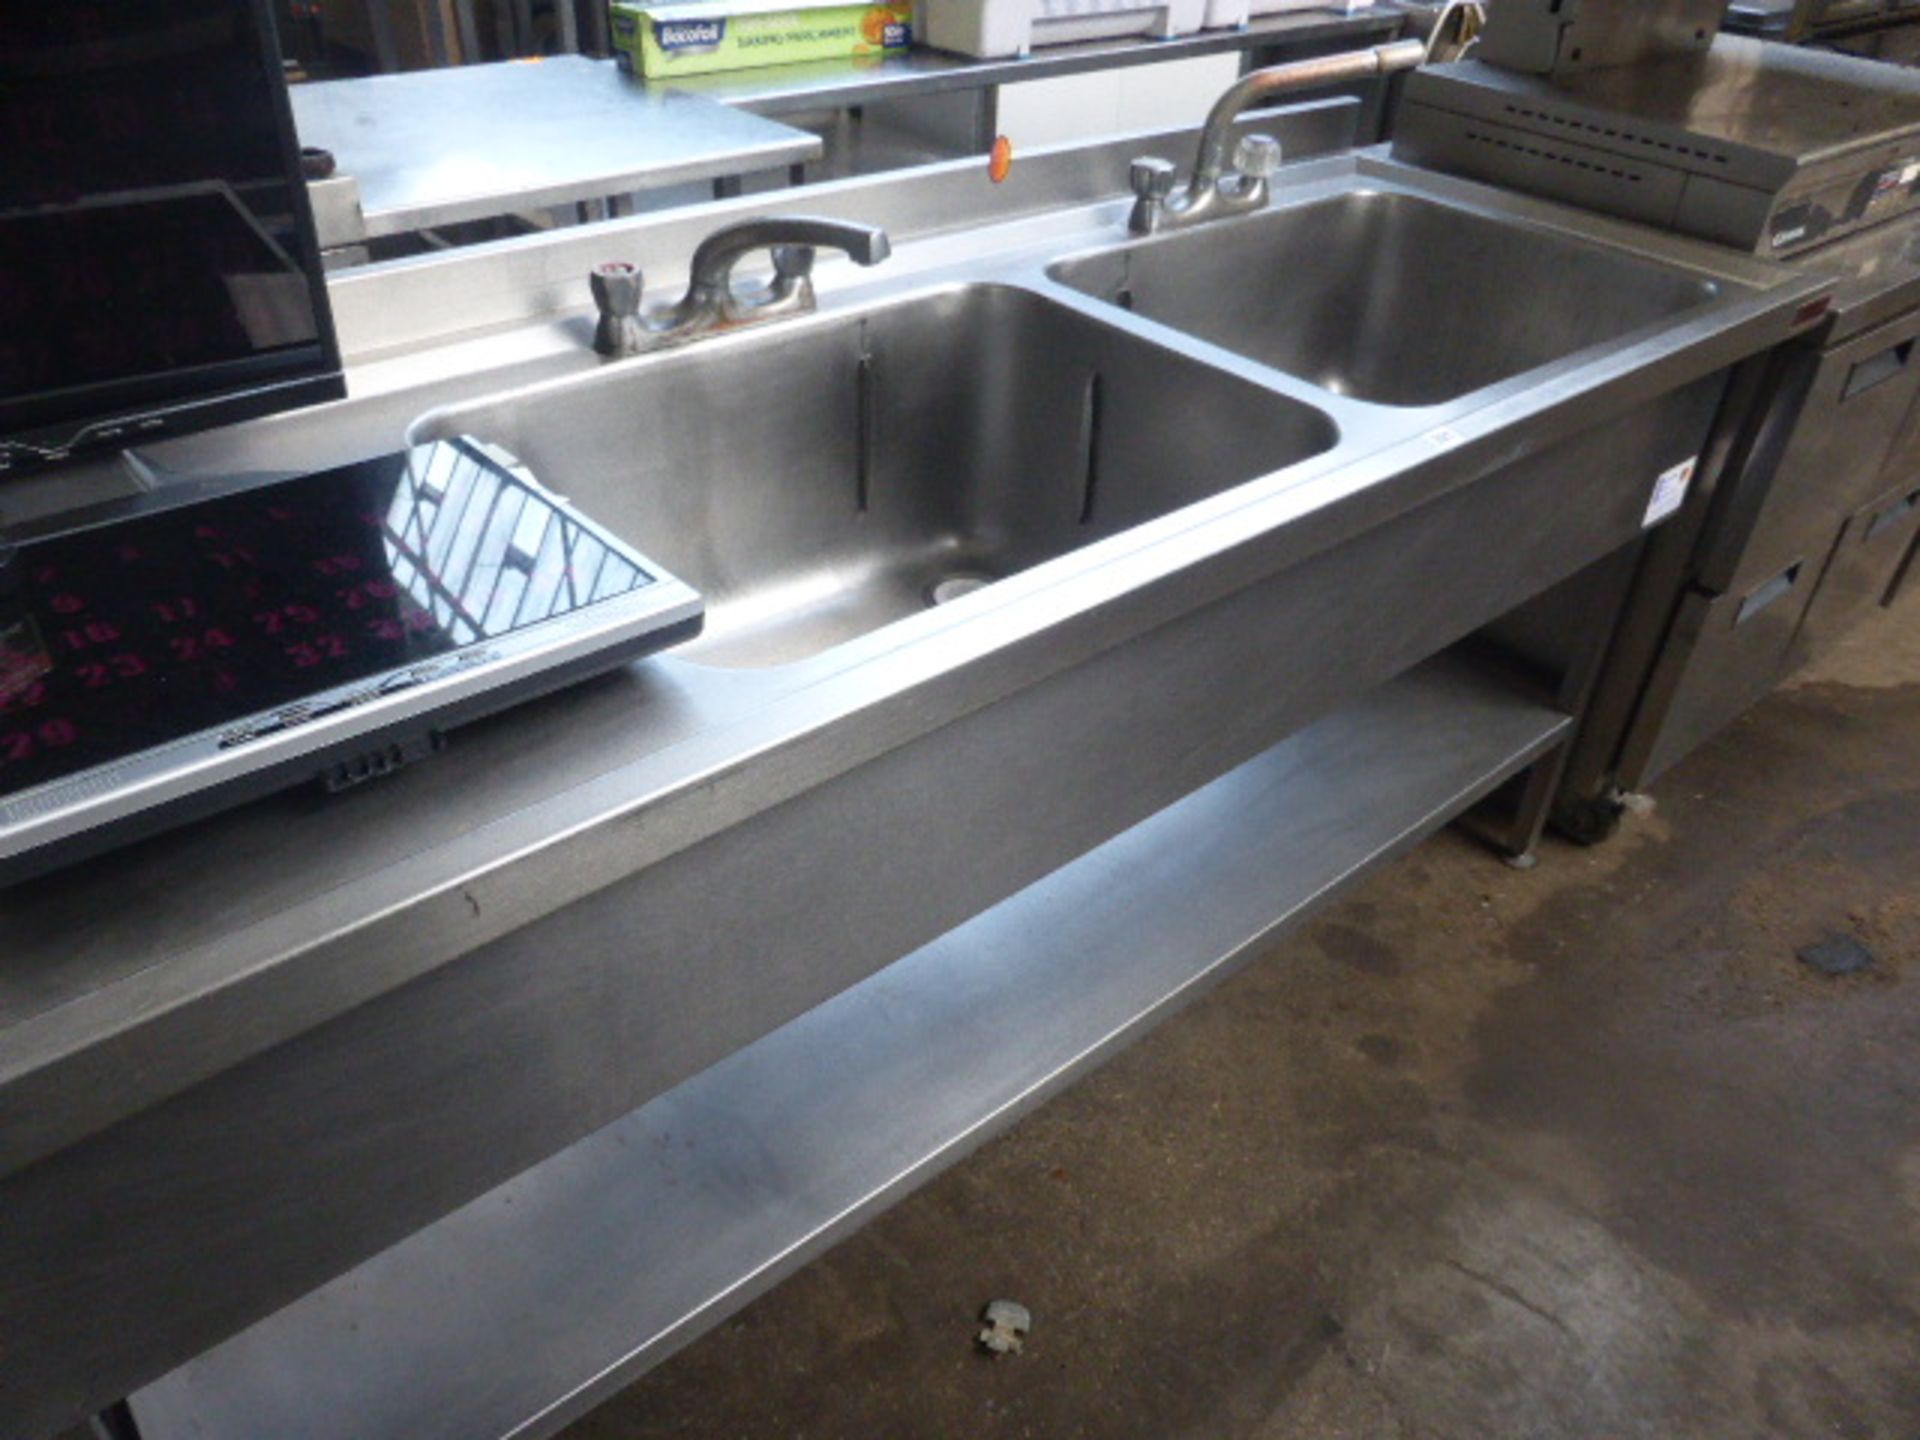 175cm stainless steel double bowl sink with tap set, draining board and shelf under